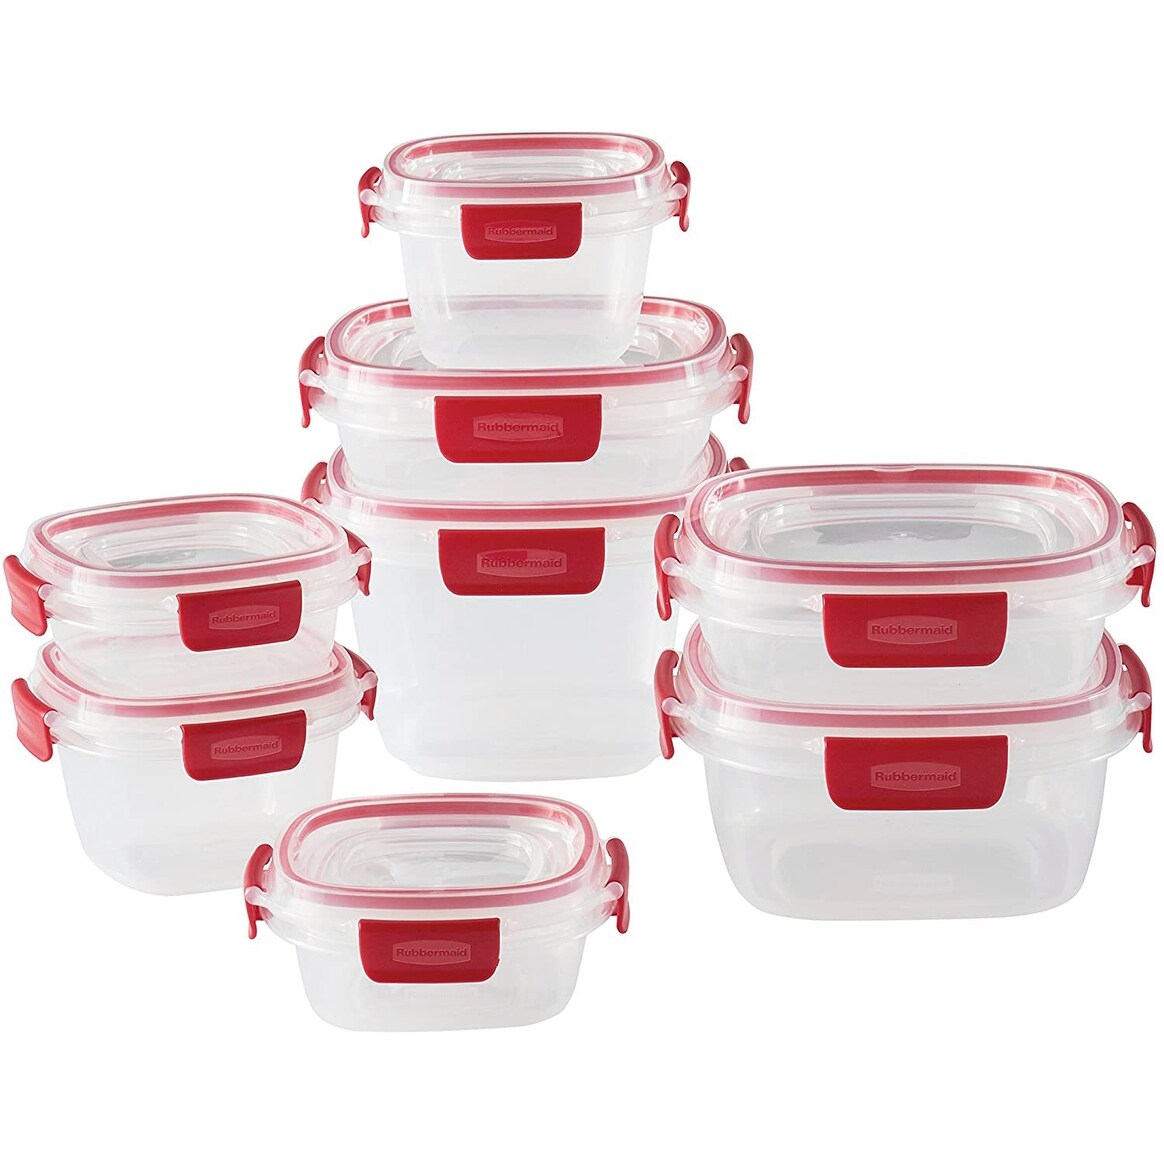 https://ak1.ostkcdn.com/images/products/is/images/direct/79c53da9df96f79519ed617f97776e6470d107dc/Rubbermaid-Easy-Find-Lids-Tabs-Food-Storage-Container%2C-16-Piece-Set%2C-Clear-with-Red-Tabs.jpg